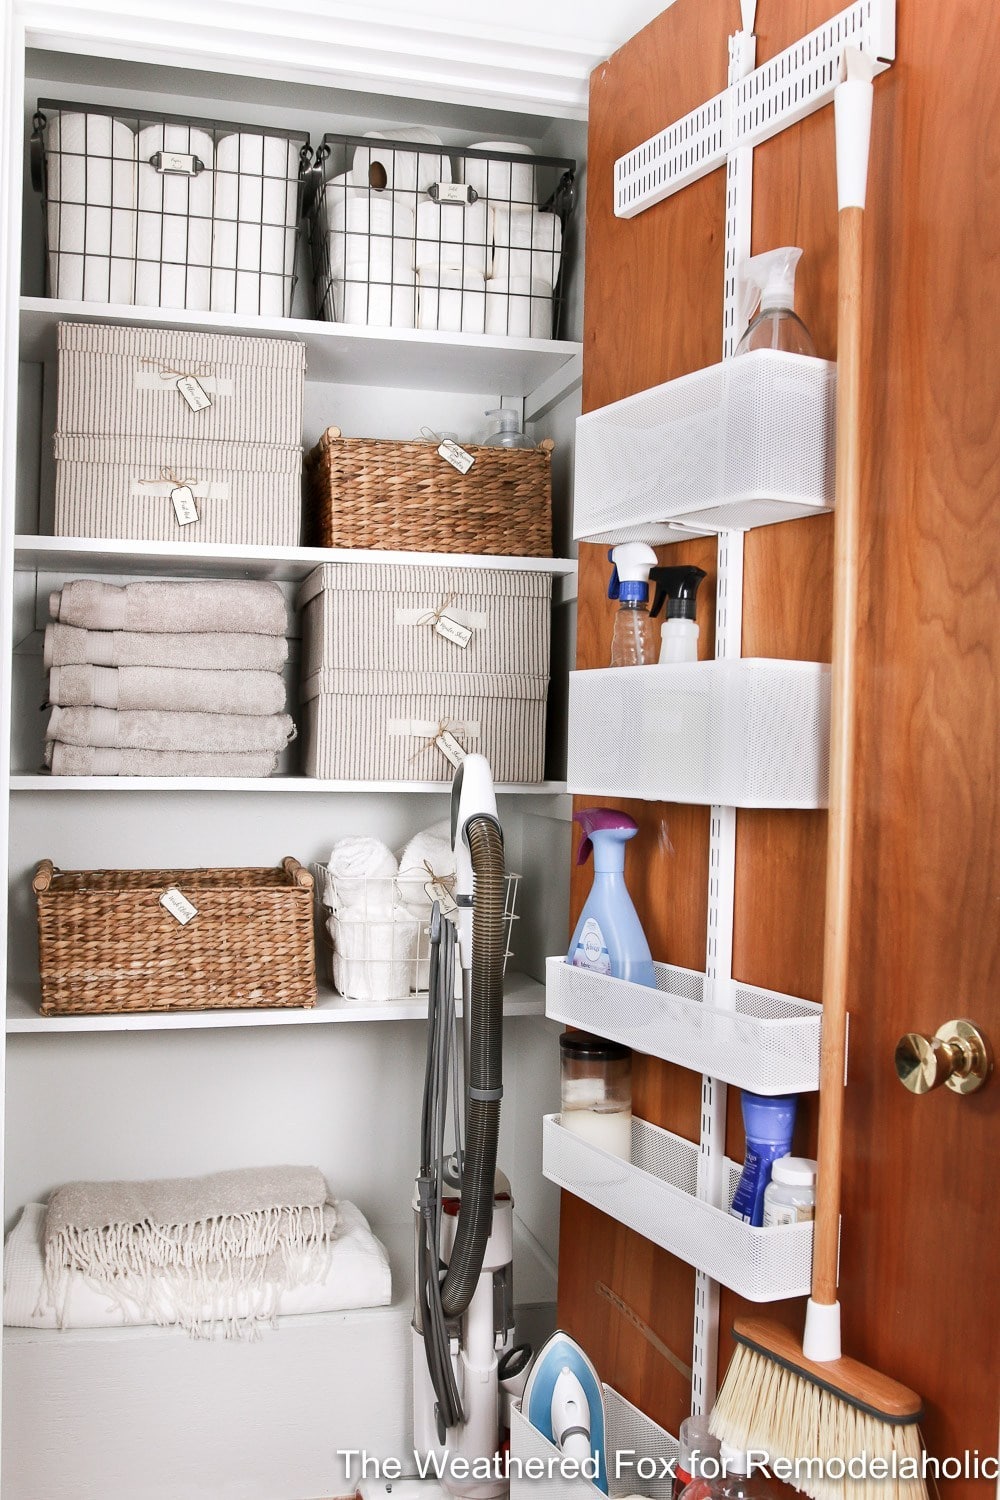 Last, but certainly not least is this beautiful linen closet from the blog Remodelaholic is filled with bins and boxes neatly labeled which I love. Plus, I really want to order a back of the door organizer with adjustable shelves like this one now!